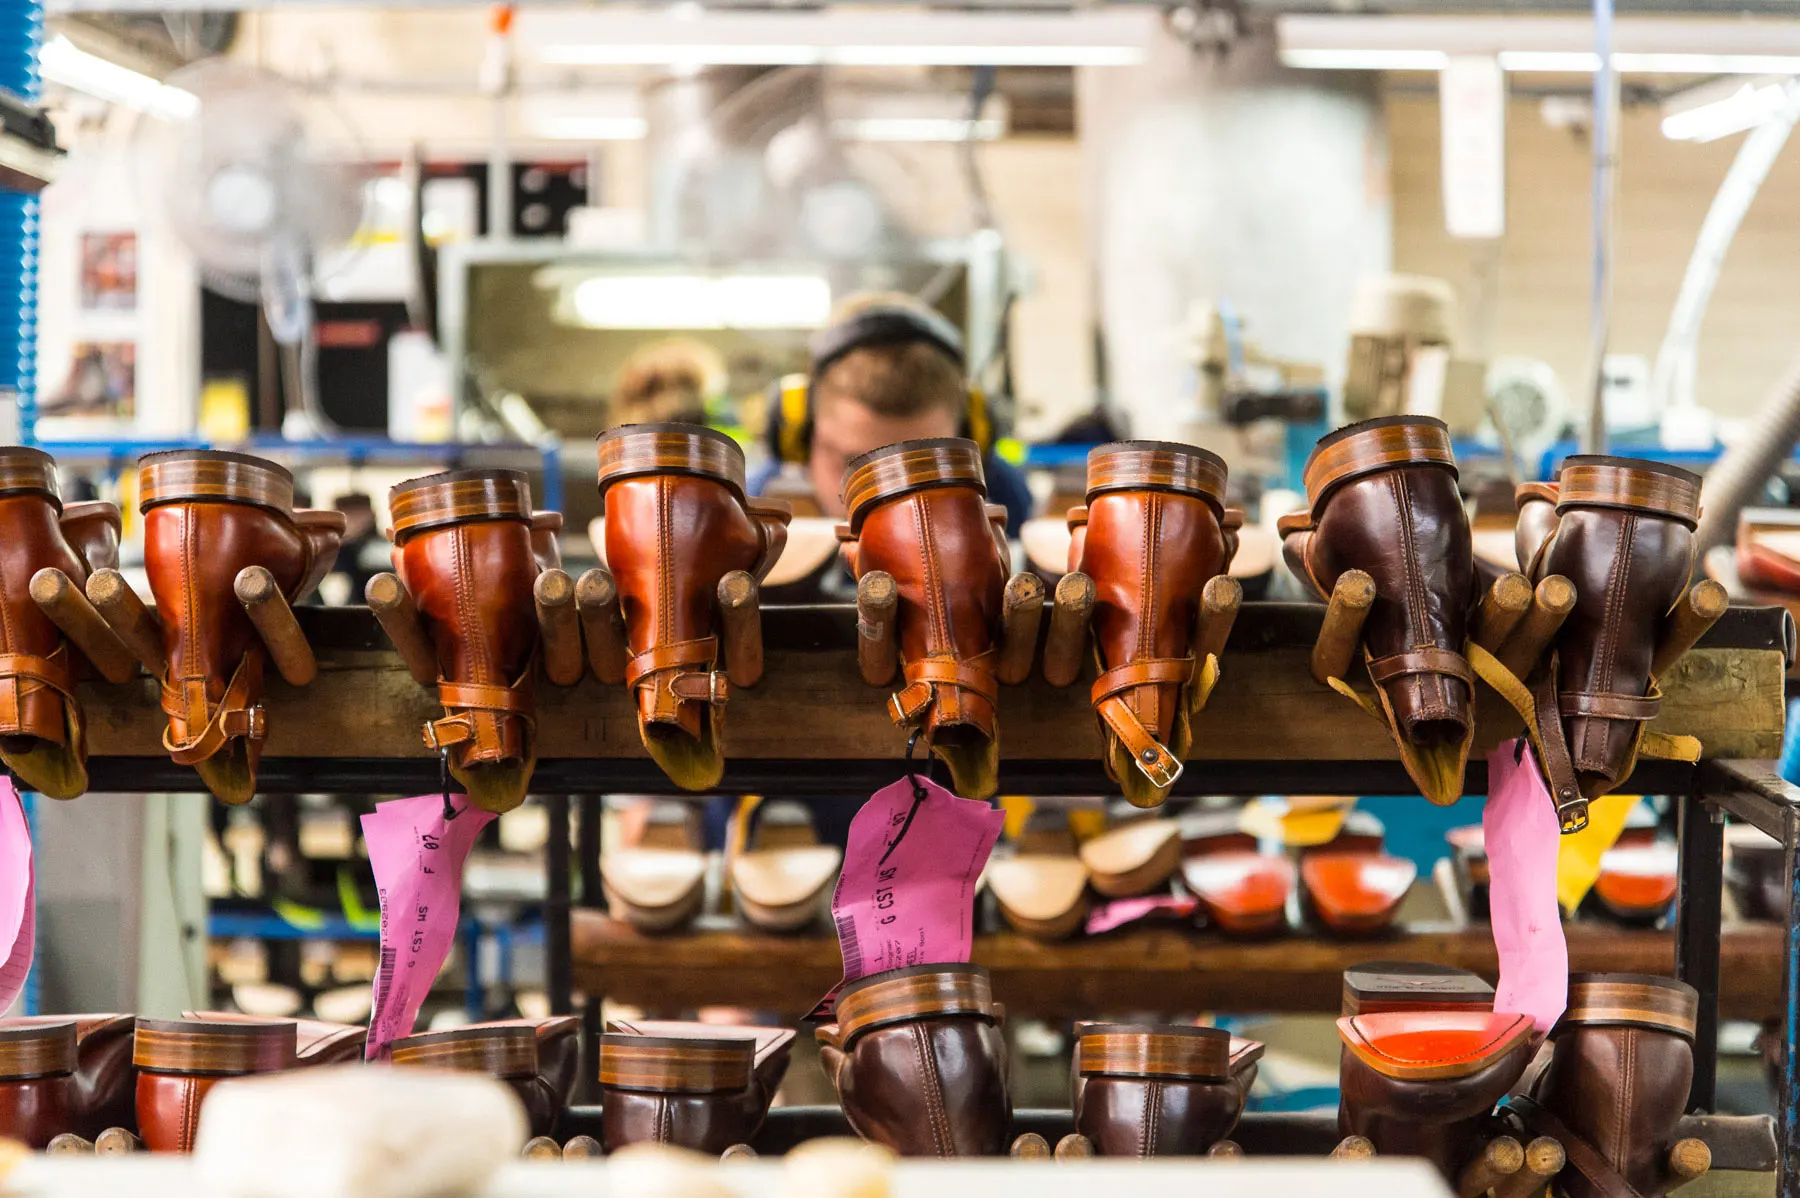 Row of R.M.Williams boots being maintained in the workshop